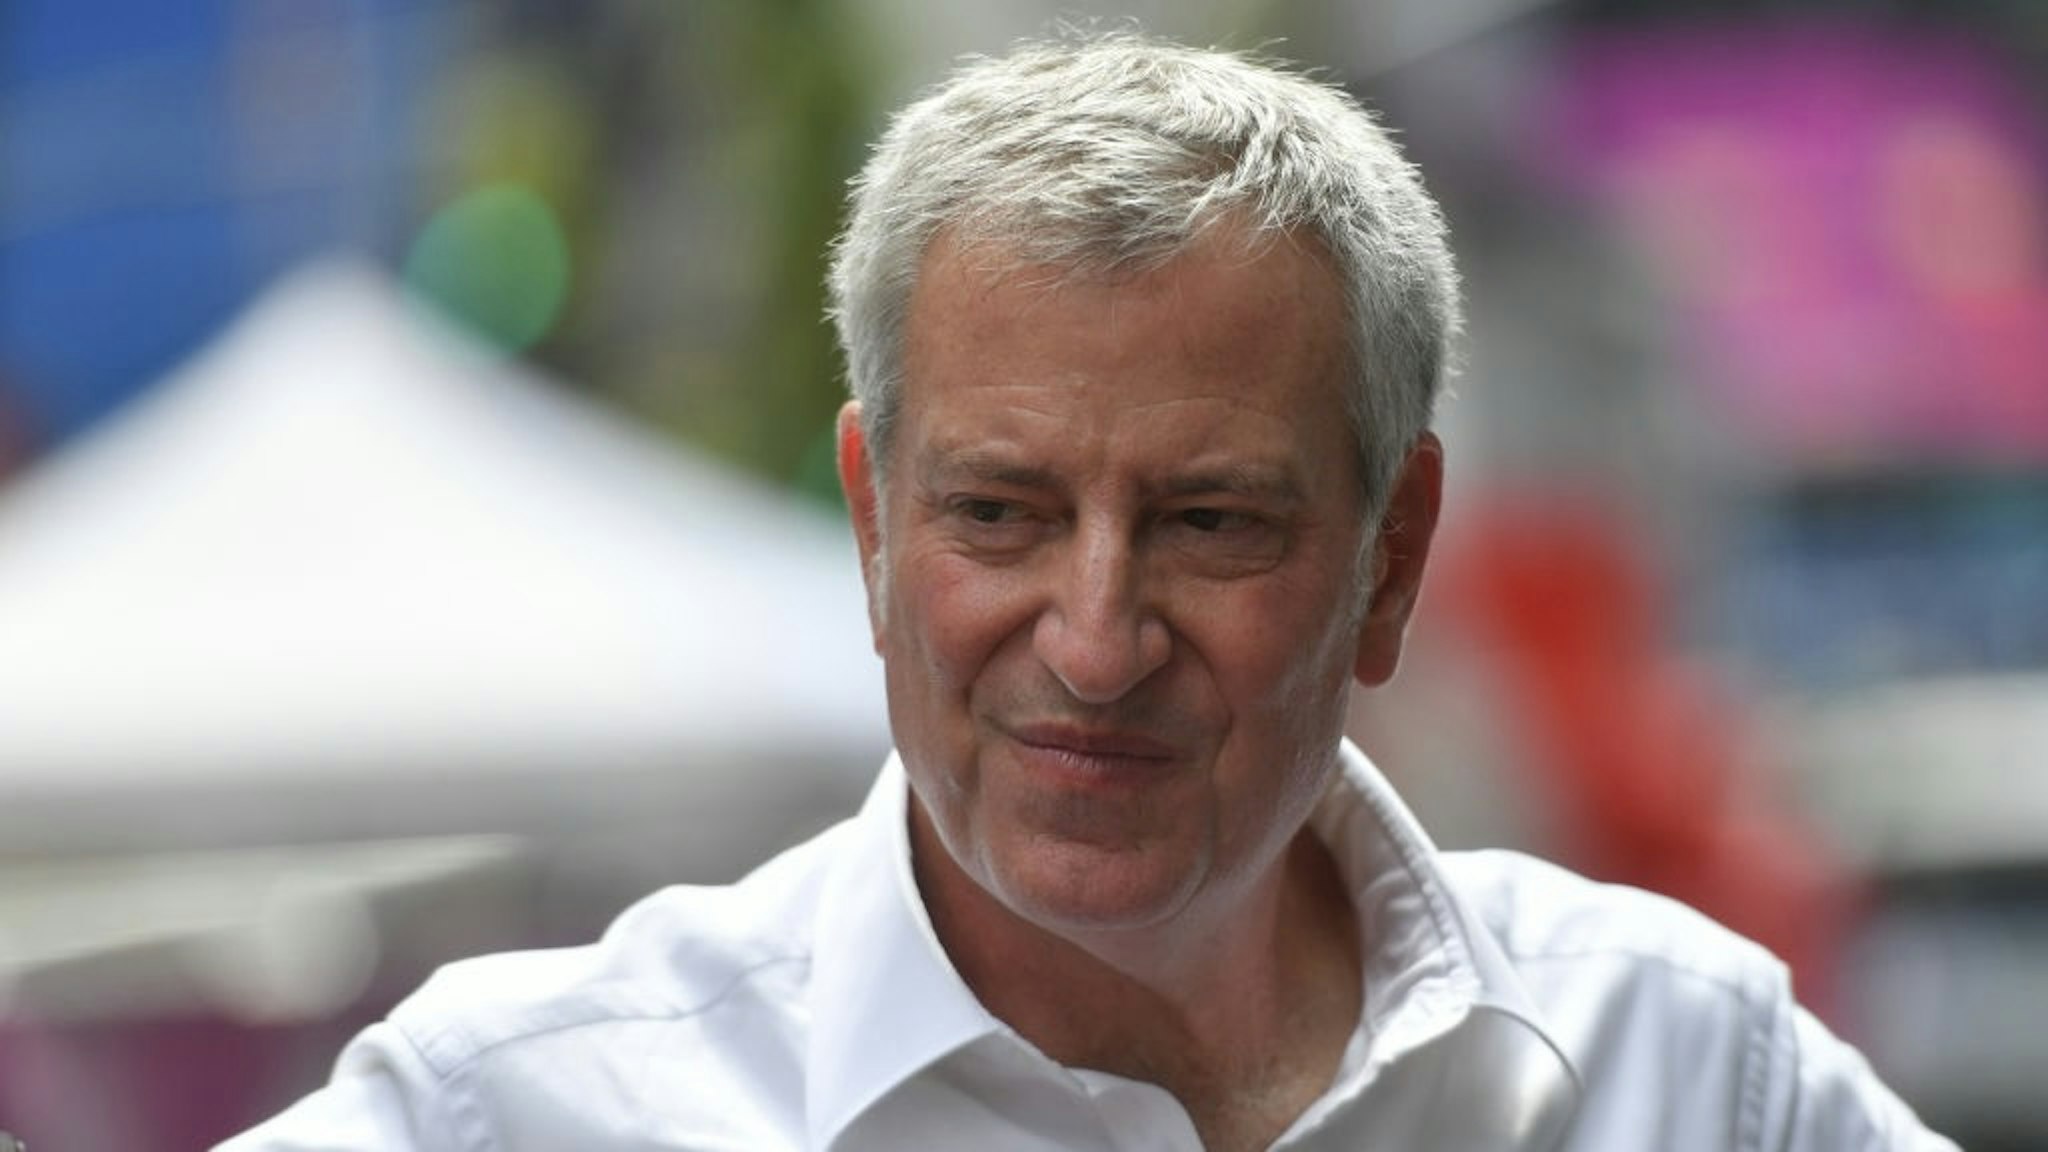 Celebrity Sightings in New York City - August 31, 2021 NEW YORK, NY - AUGUST 31: Bill de Blasio is seen on August 31, 2021 in New York City. (Photo by NDZ/Star Max/GC Images) NDZ/Star Max / Contributor